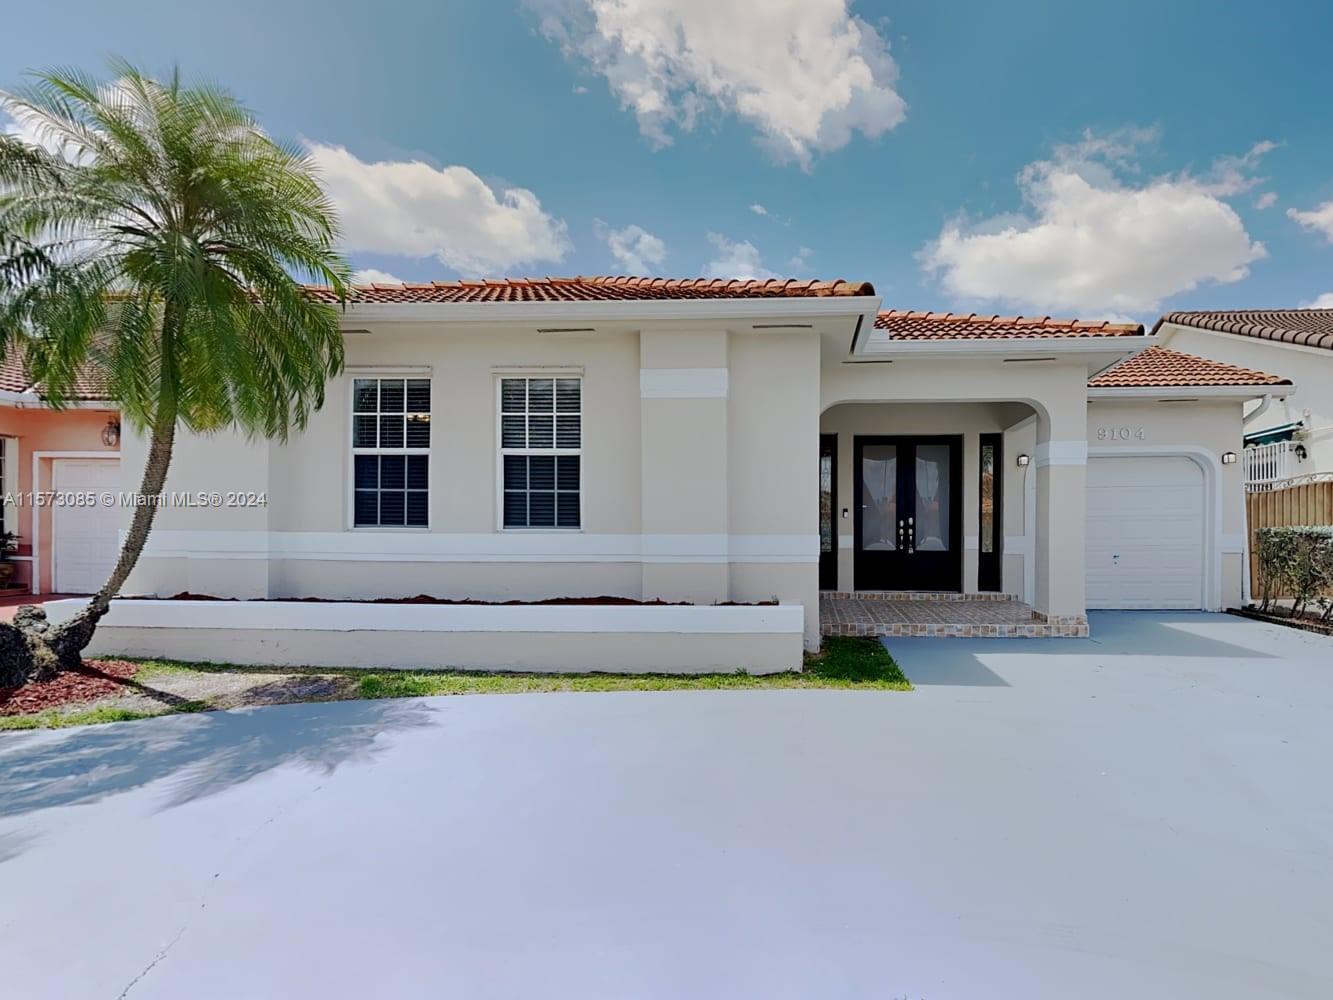 Photo of 9104 NW 147th Ter in Miami Lakes, FL